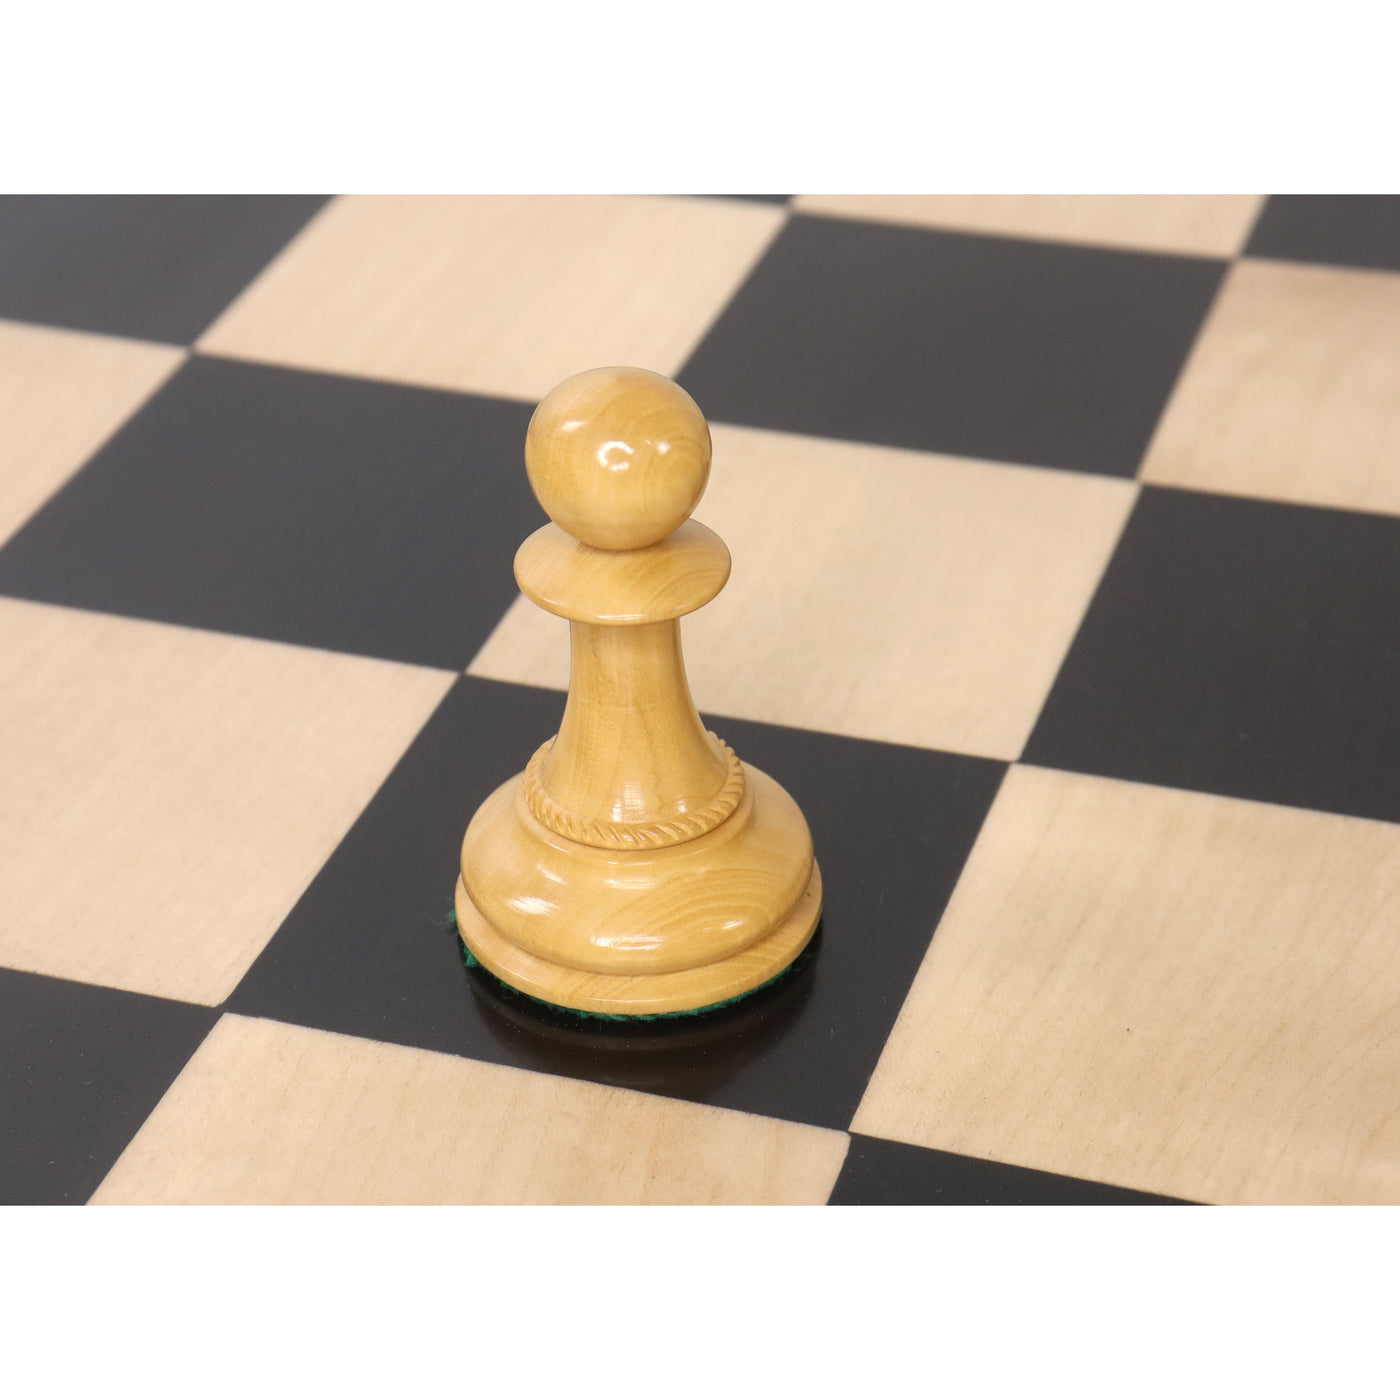 Slightly Imperfect 4.5" Imperator Luxury Staunton Chess Set - Chess Pieces Only - Ebony Wood - Triple Weight